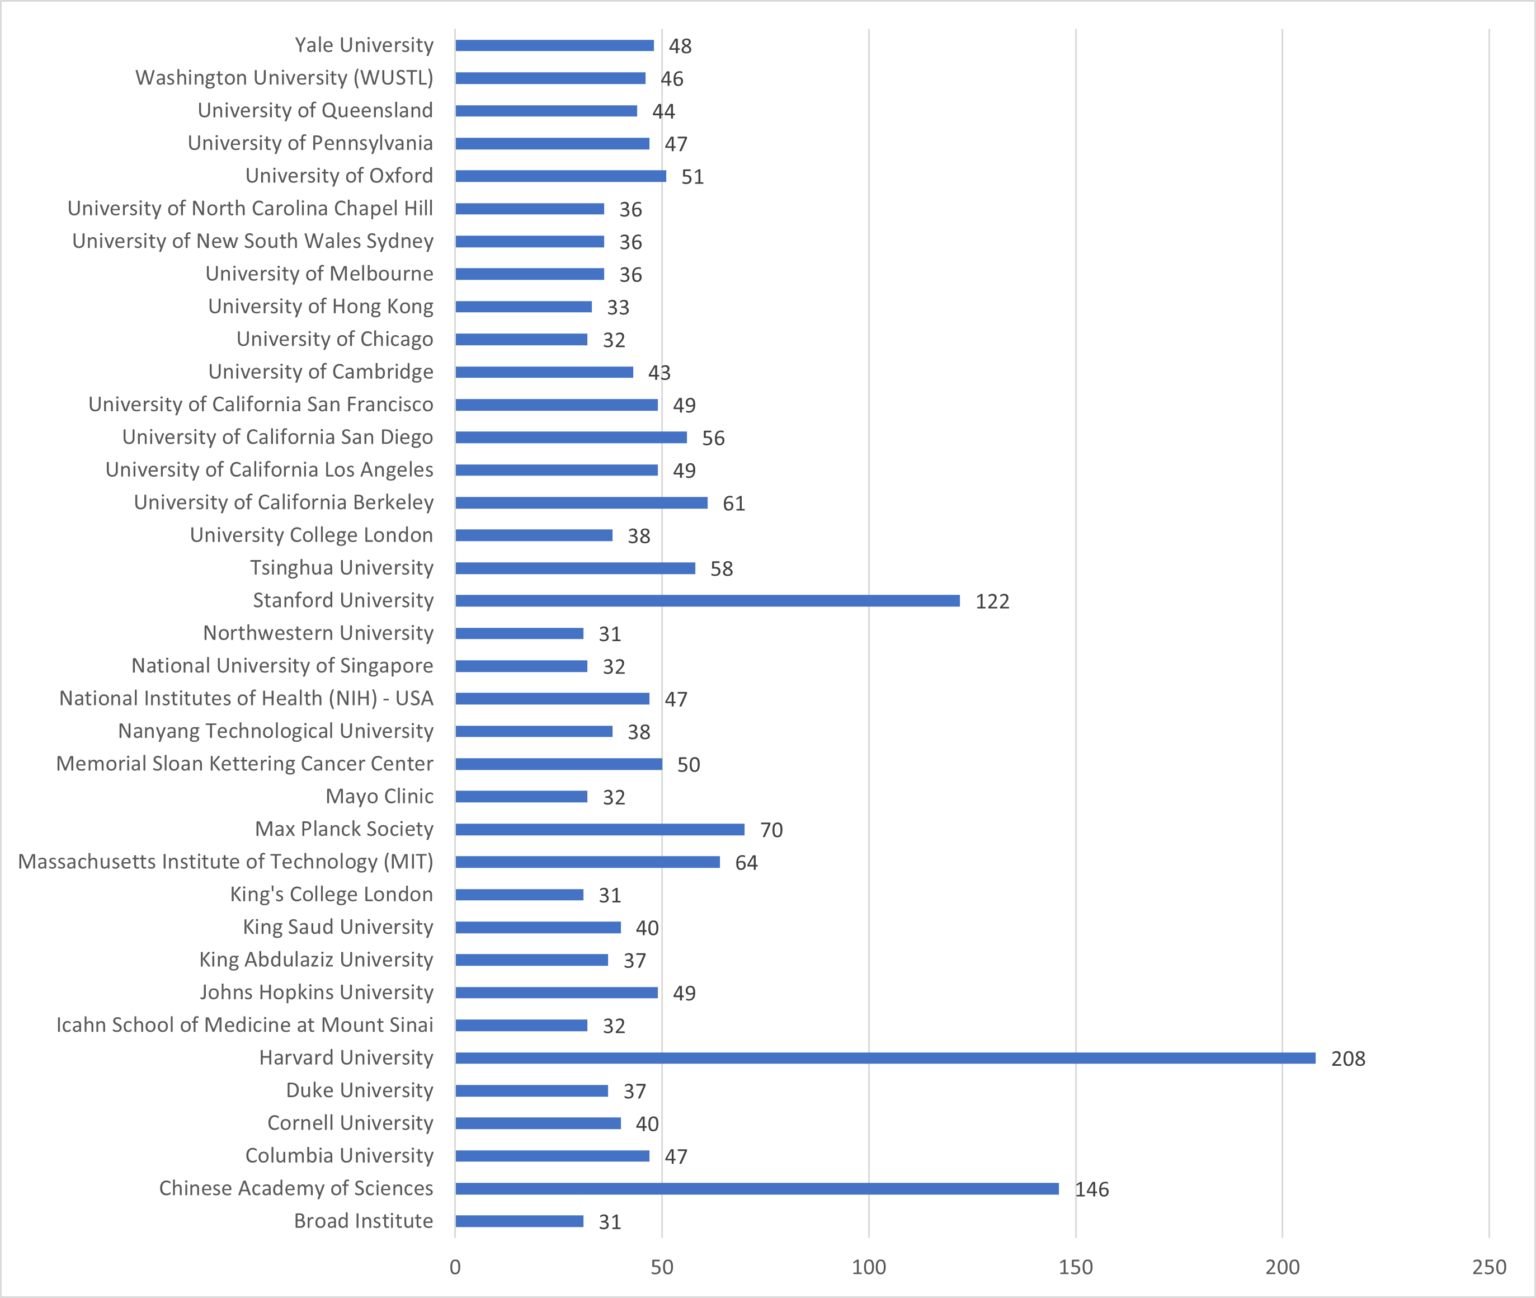 2021 Highly Cited Researchers by Clarivate (Web of Science)